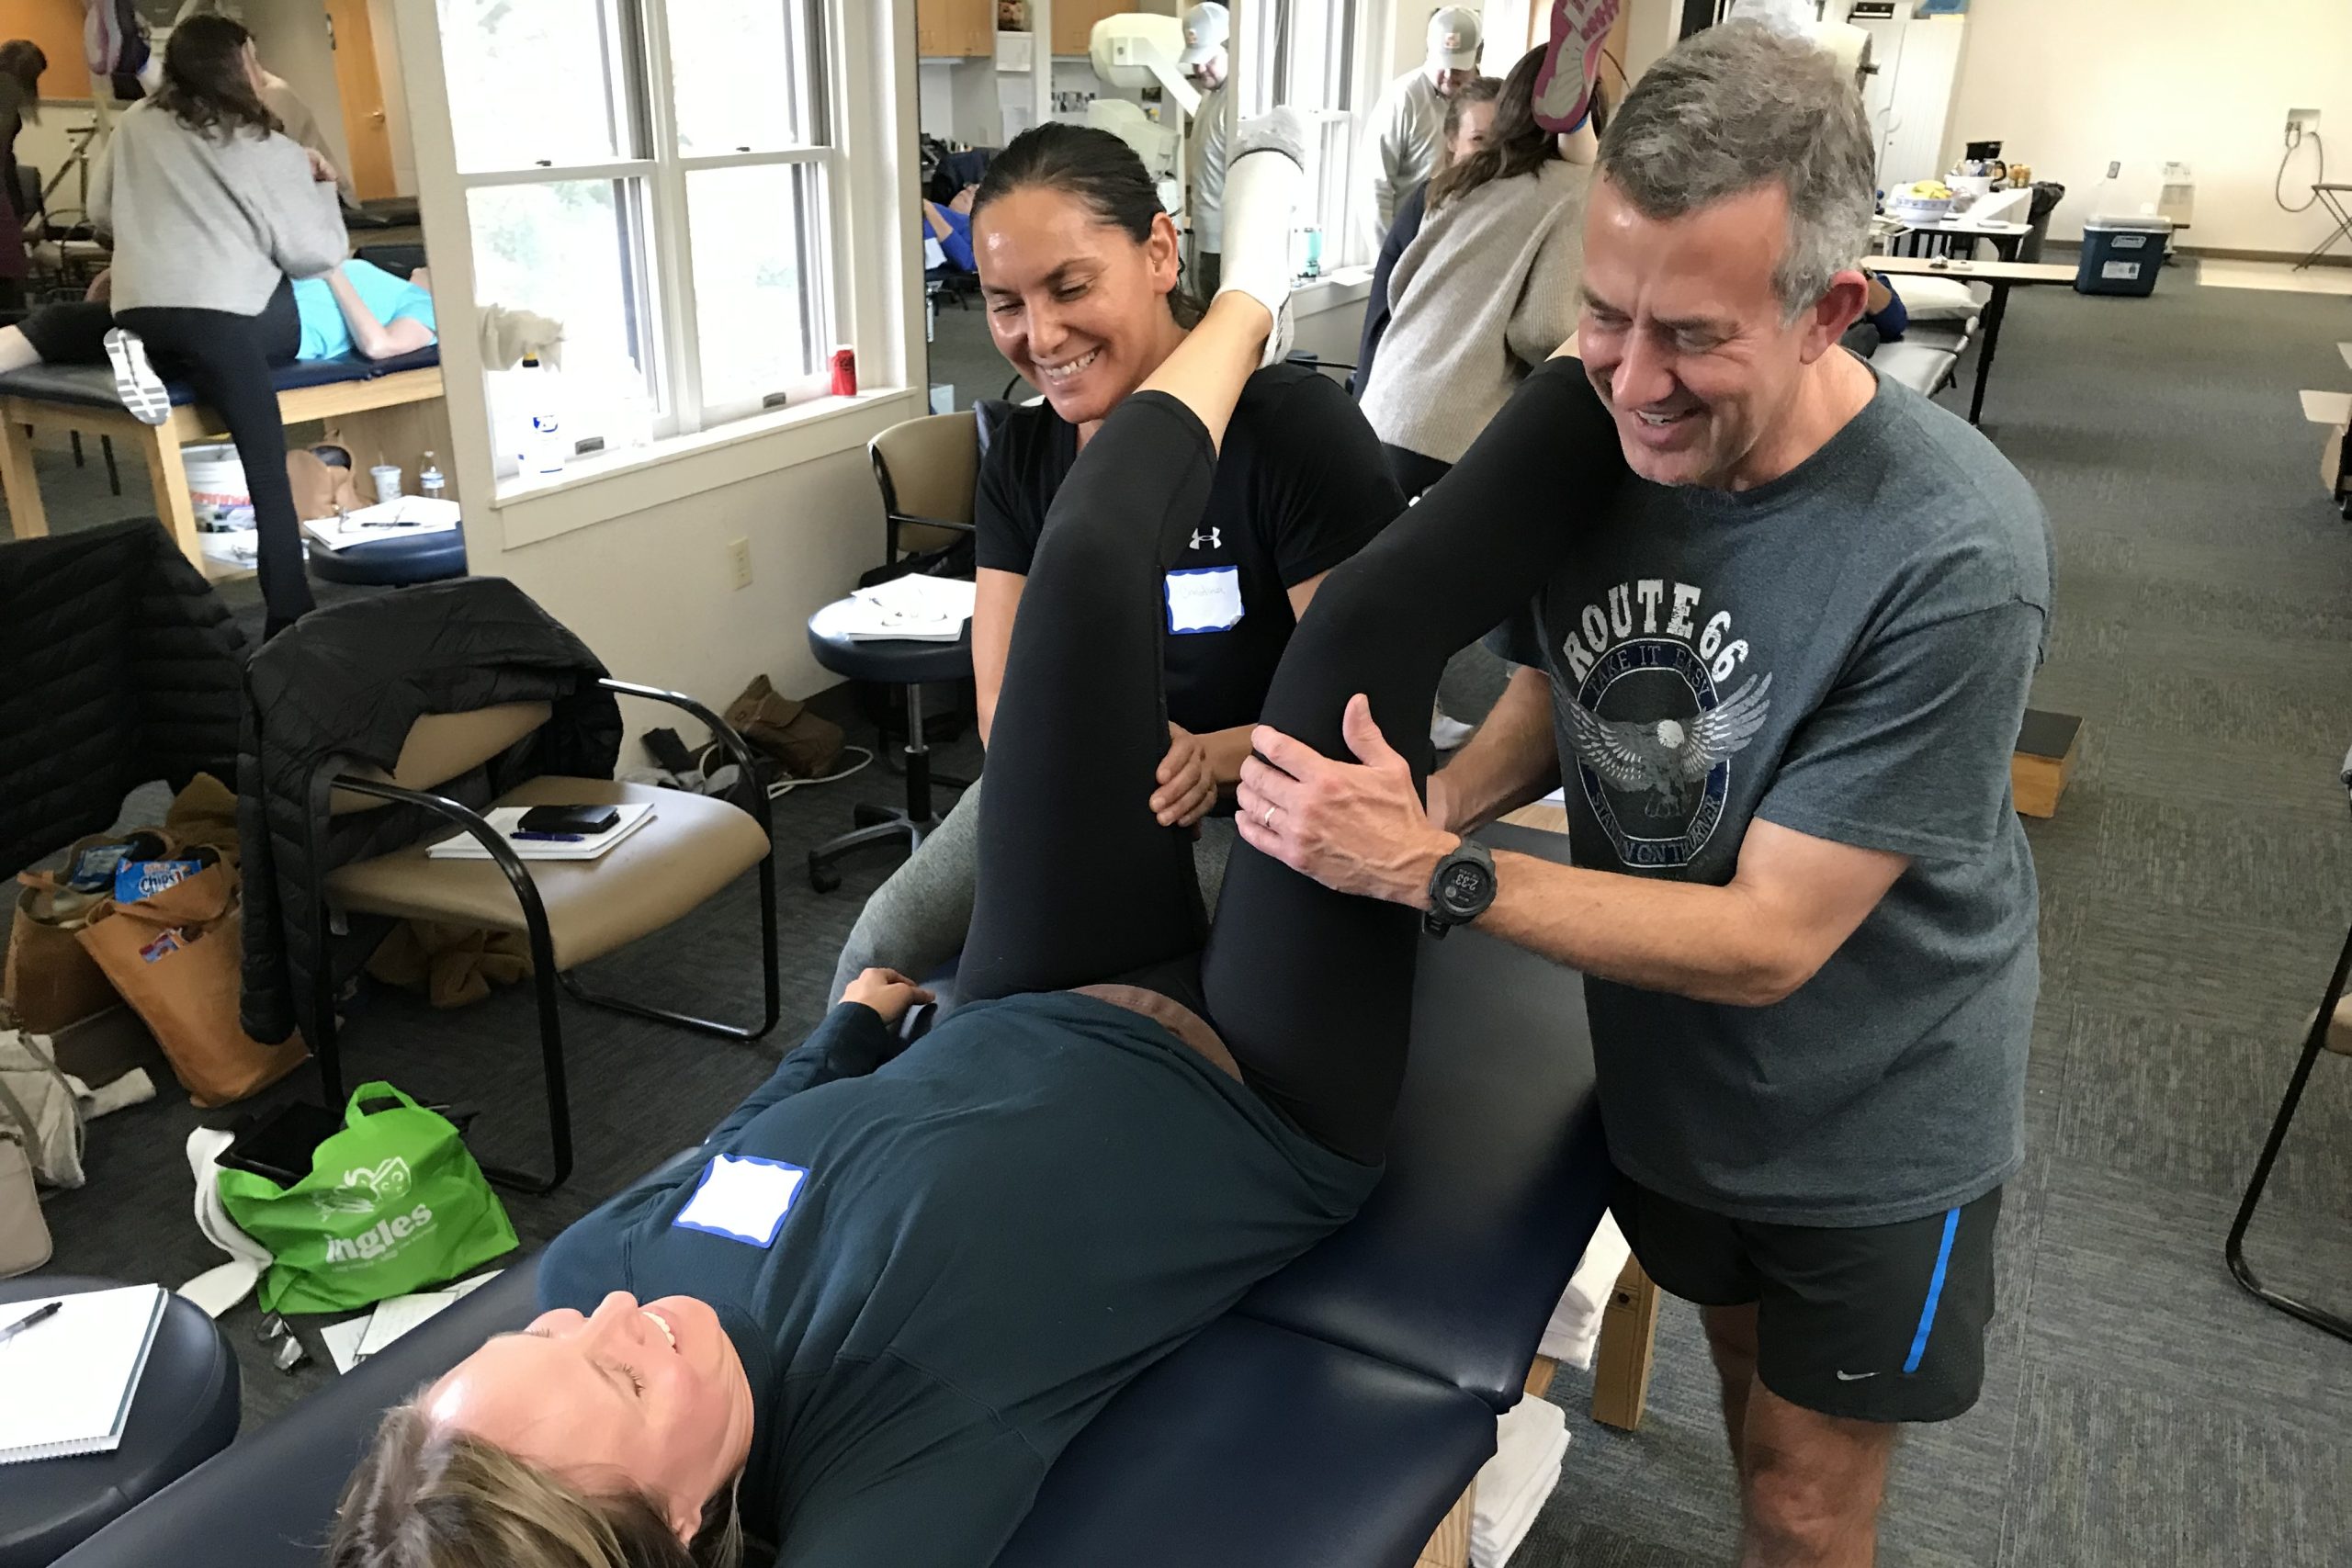 physical therapists practicing new techniques at comprehensive hip CEU course